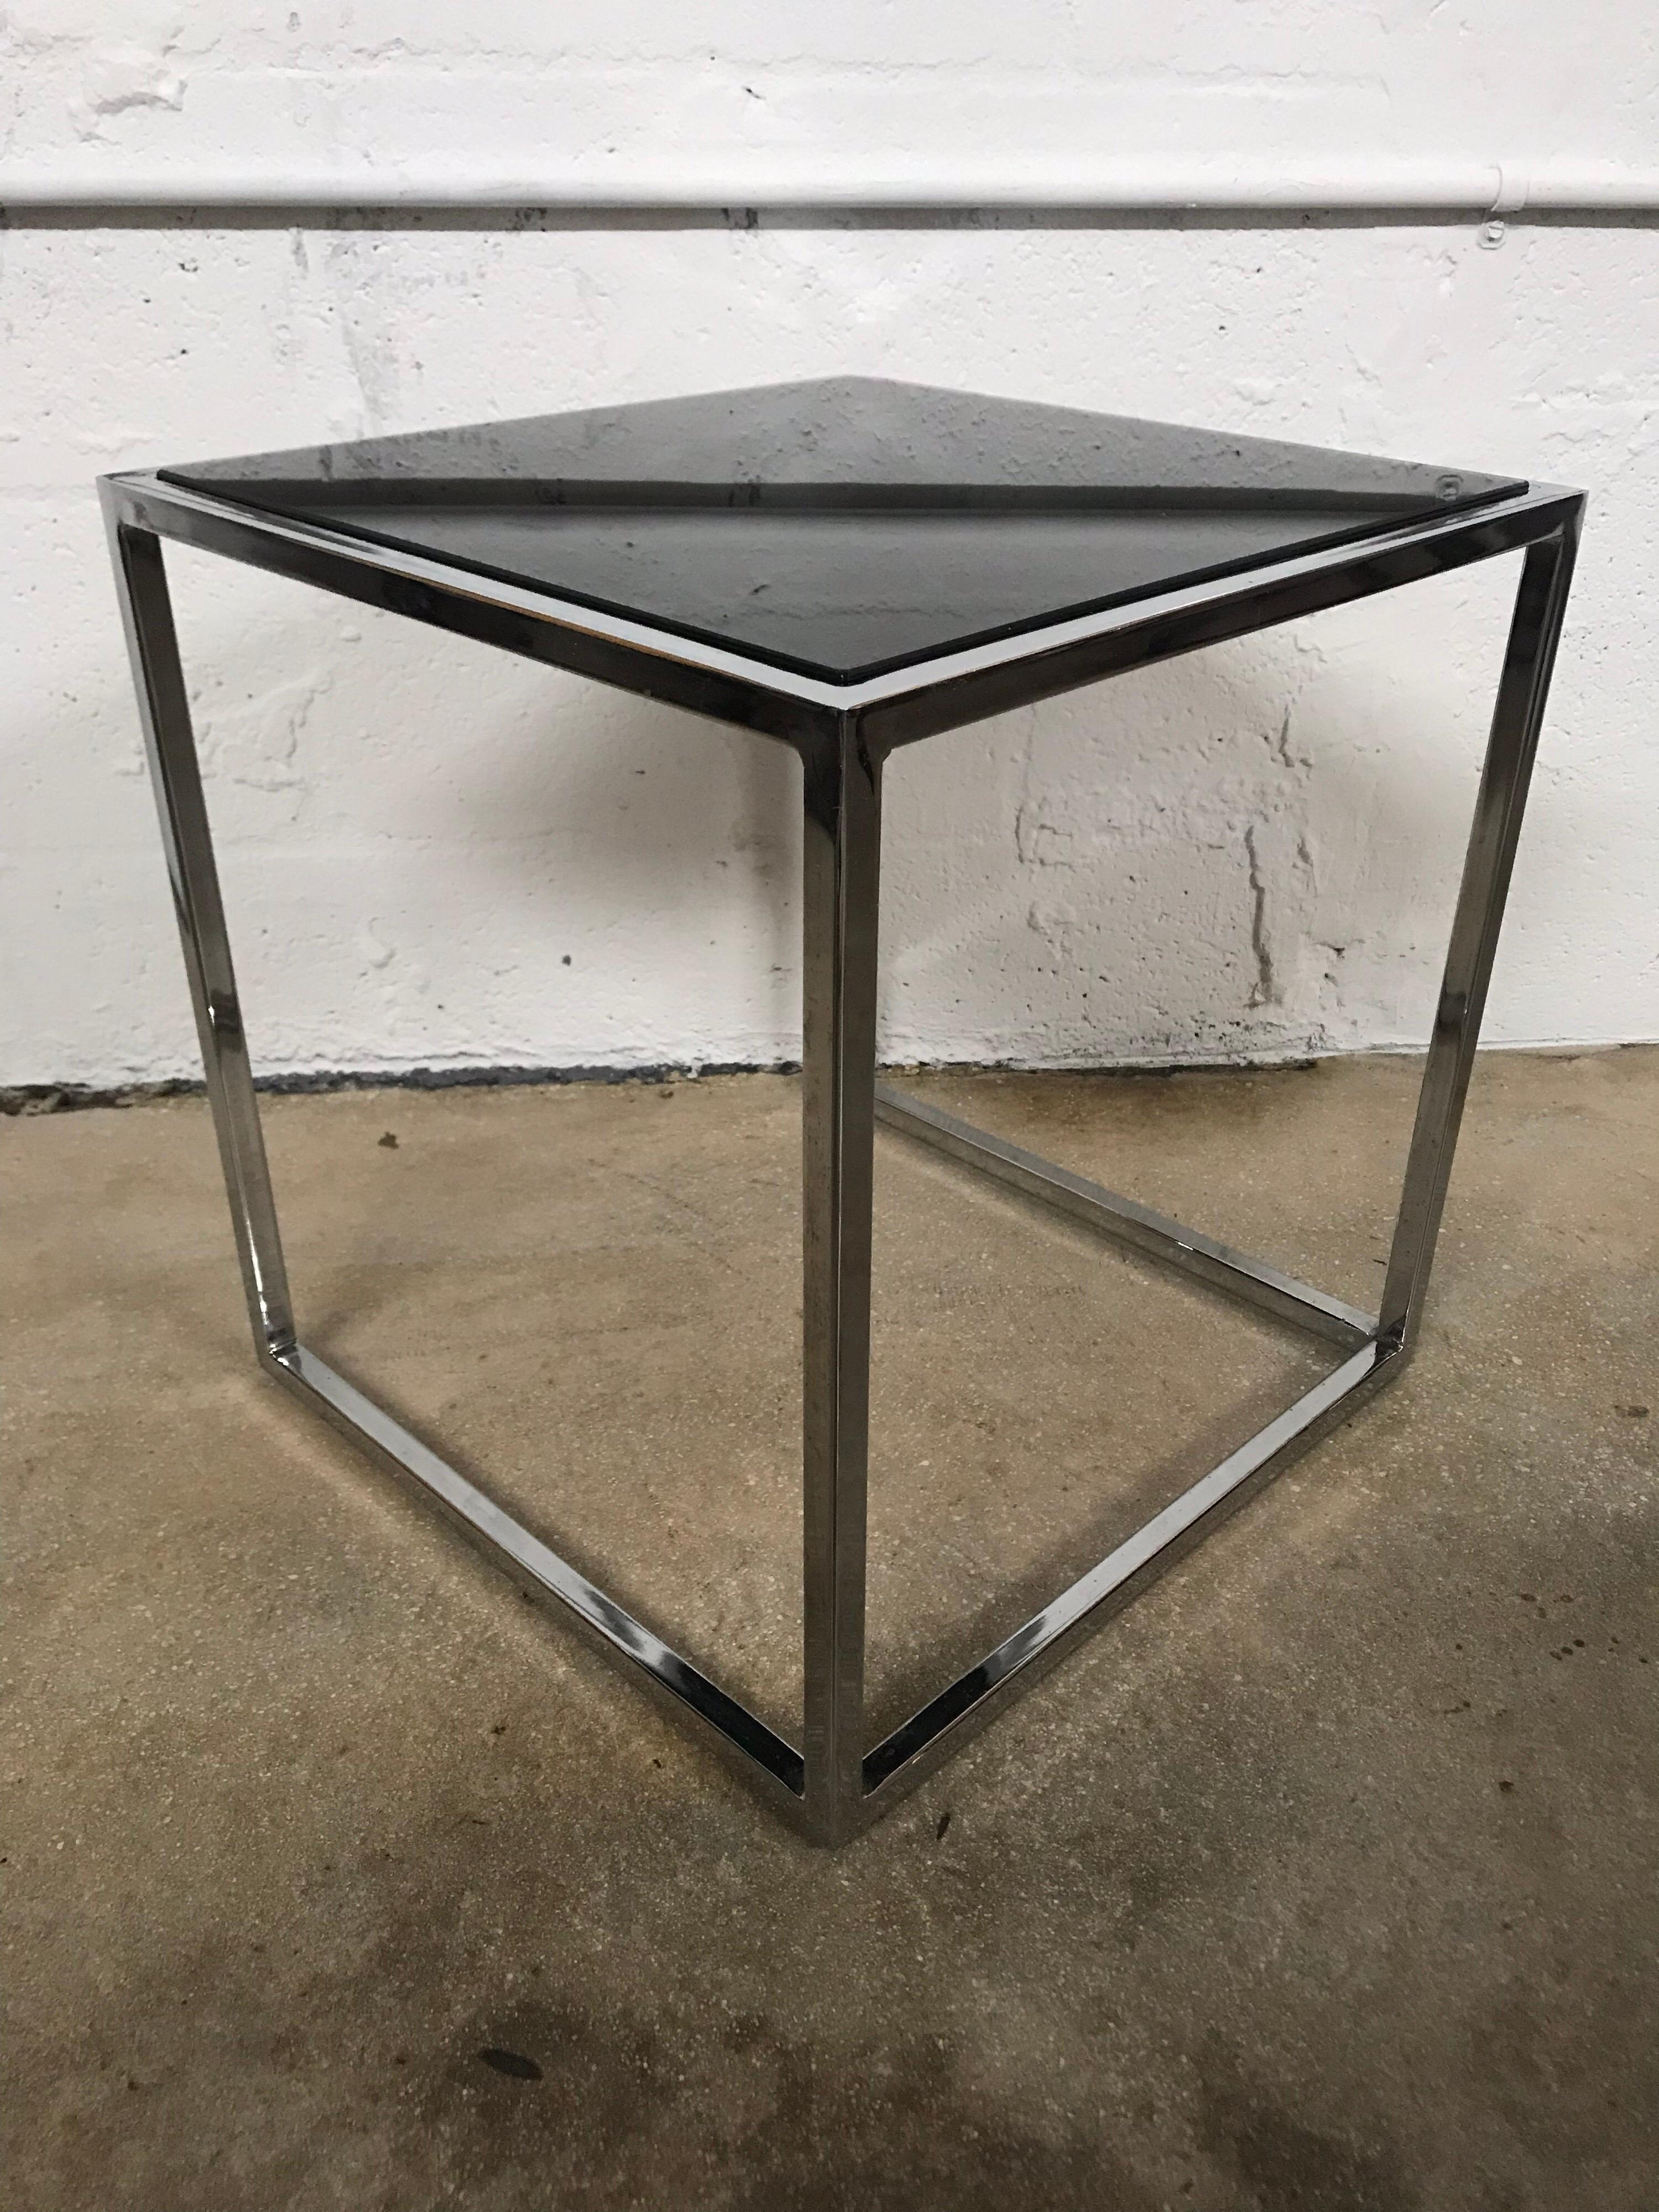 Thinline side end or occasional table in the style of Milo Baughman rendered in chrome-plated steel with a black glass top.